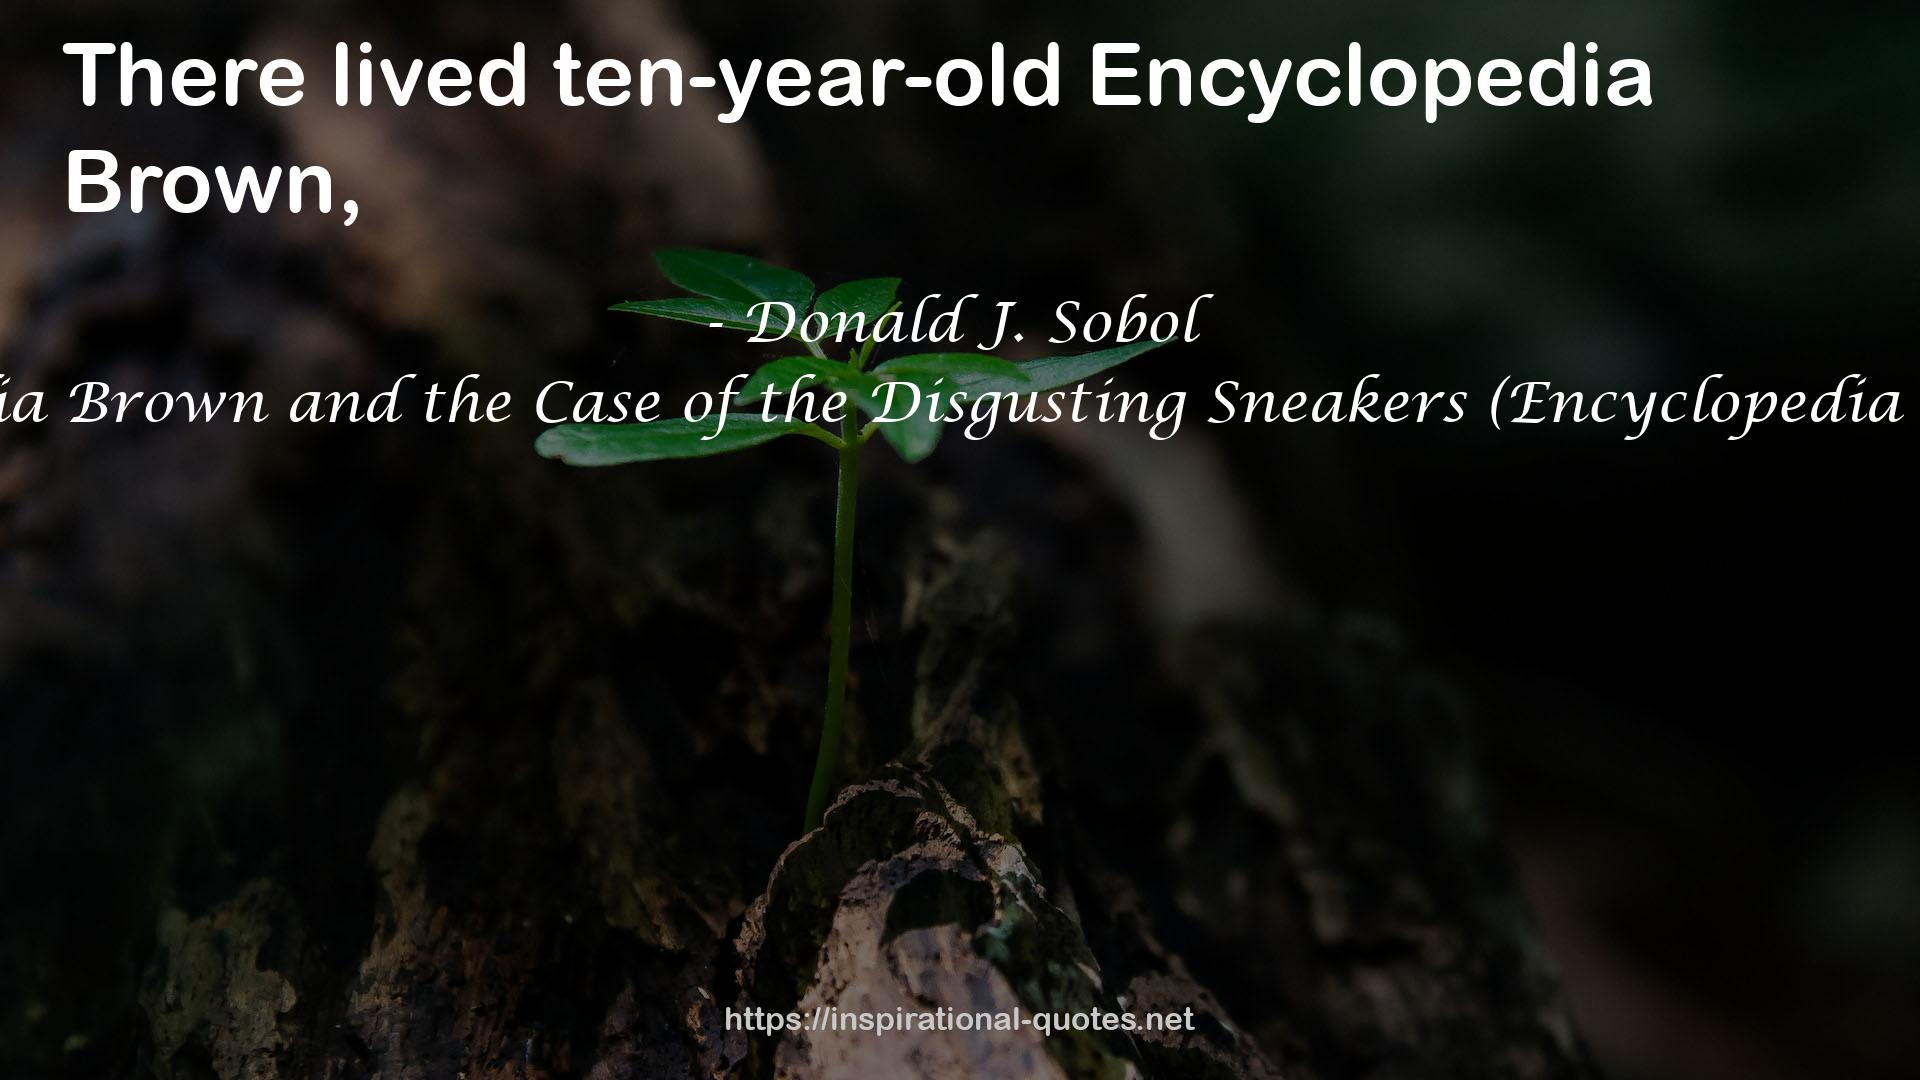 Encyclopedia Brown and the Case of the Disgusting Sneakers (Encyclopedia Brown, #18) QUOTES